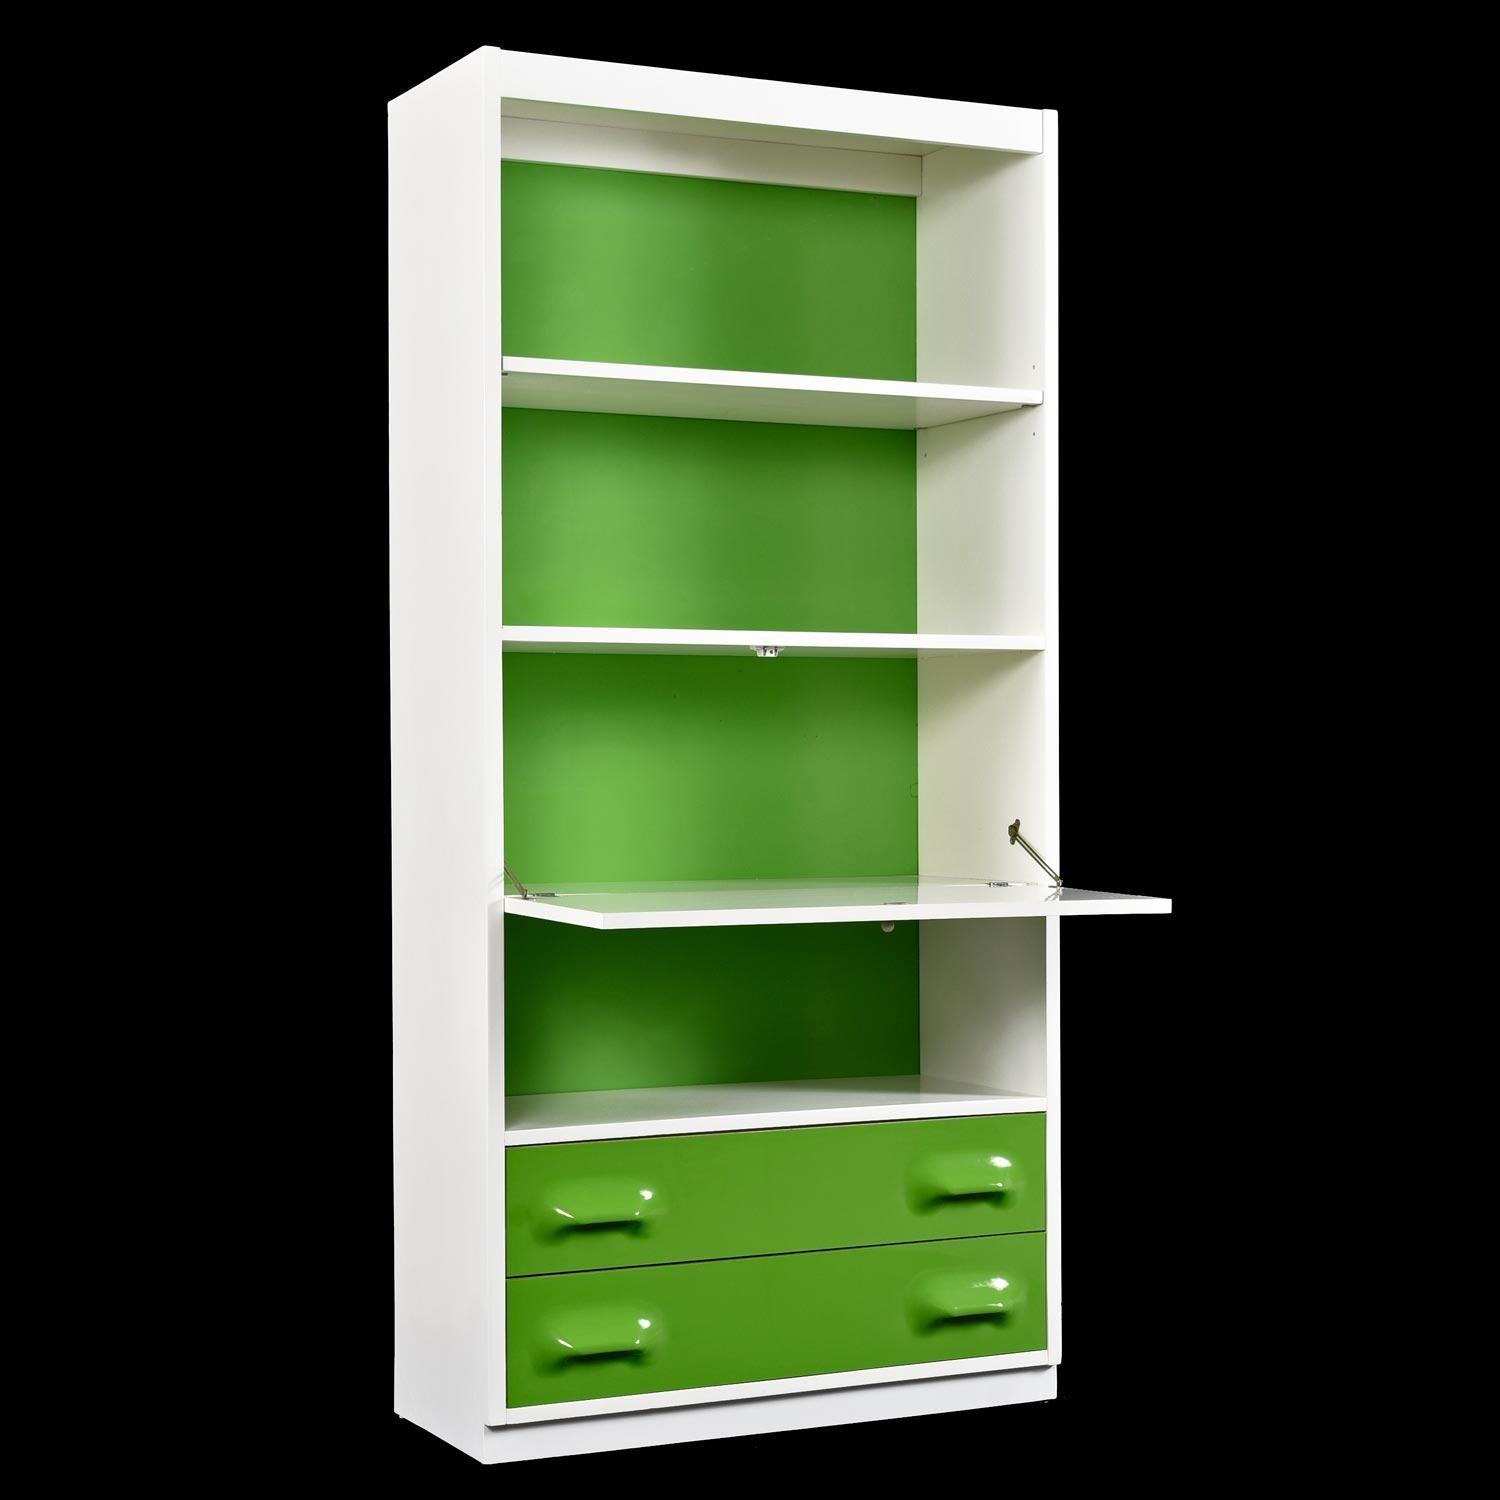 Space Age Raymond Loewy Inspired Green Chapter One Desk-Bar Bookcase by Broyhill Premier